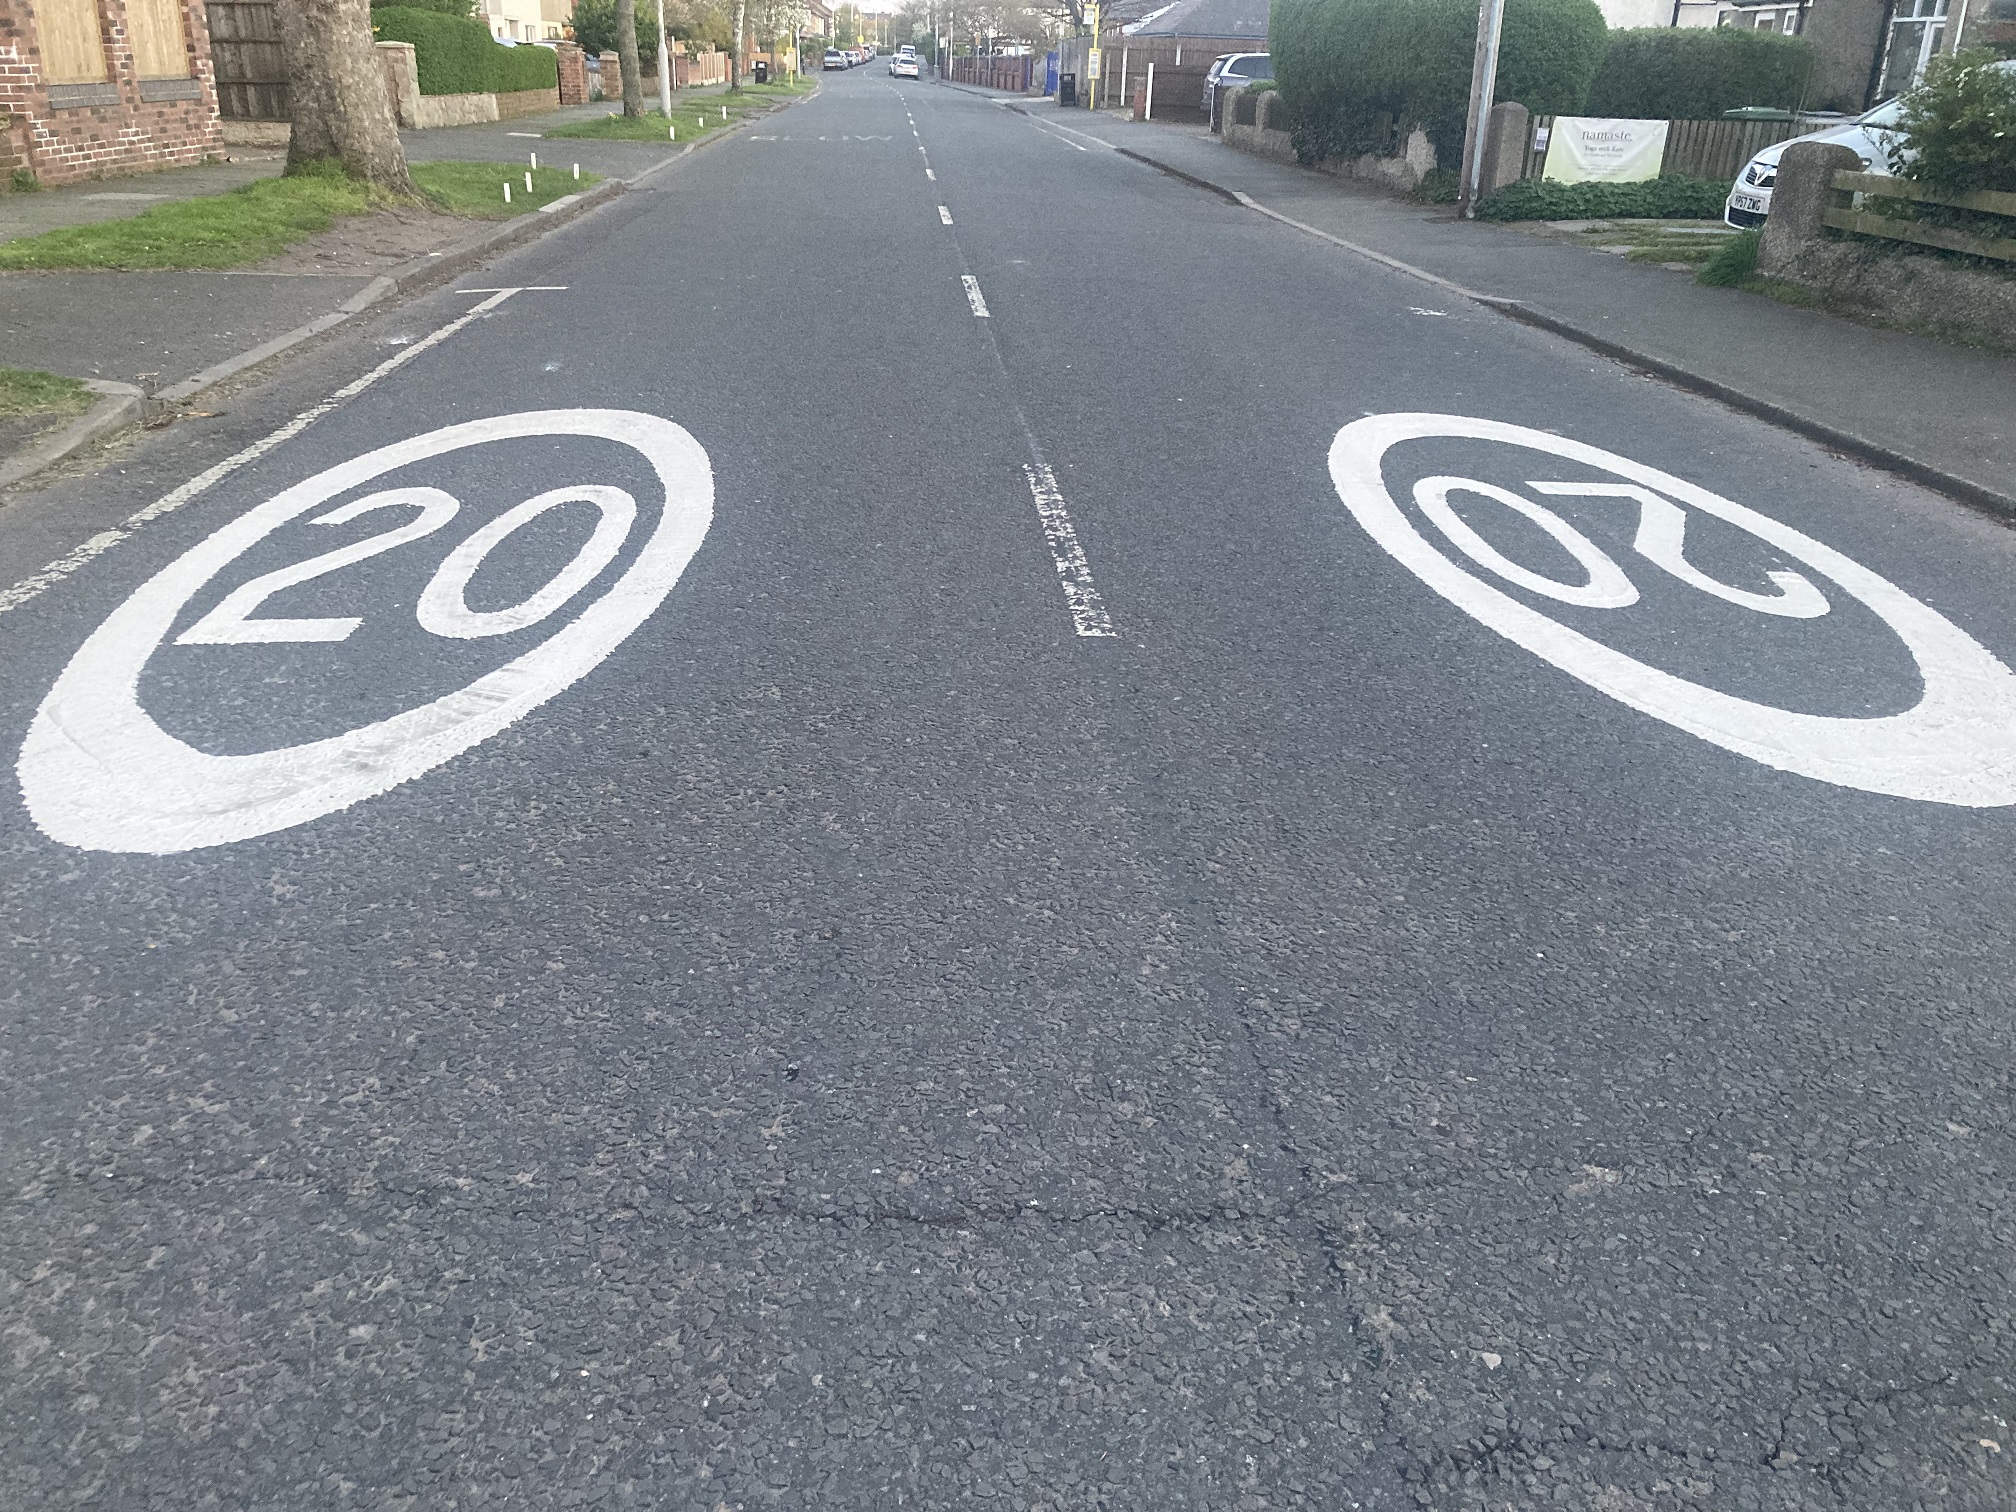 Call for people to champion 20mph zones